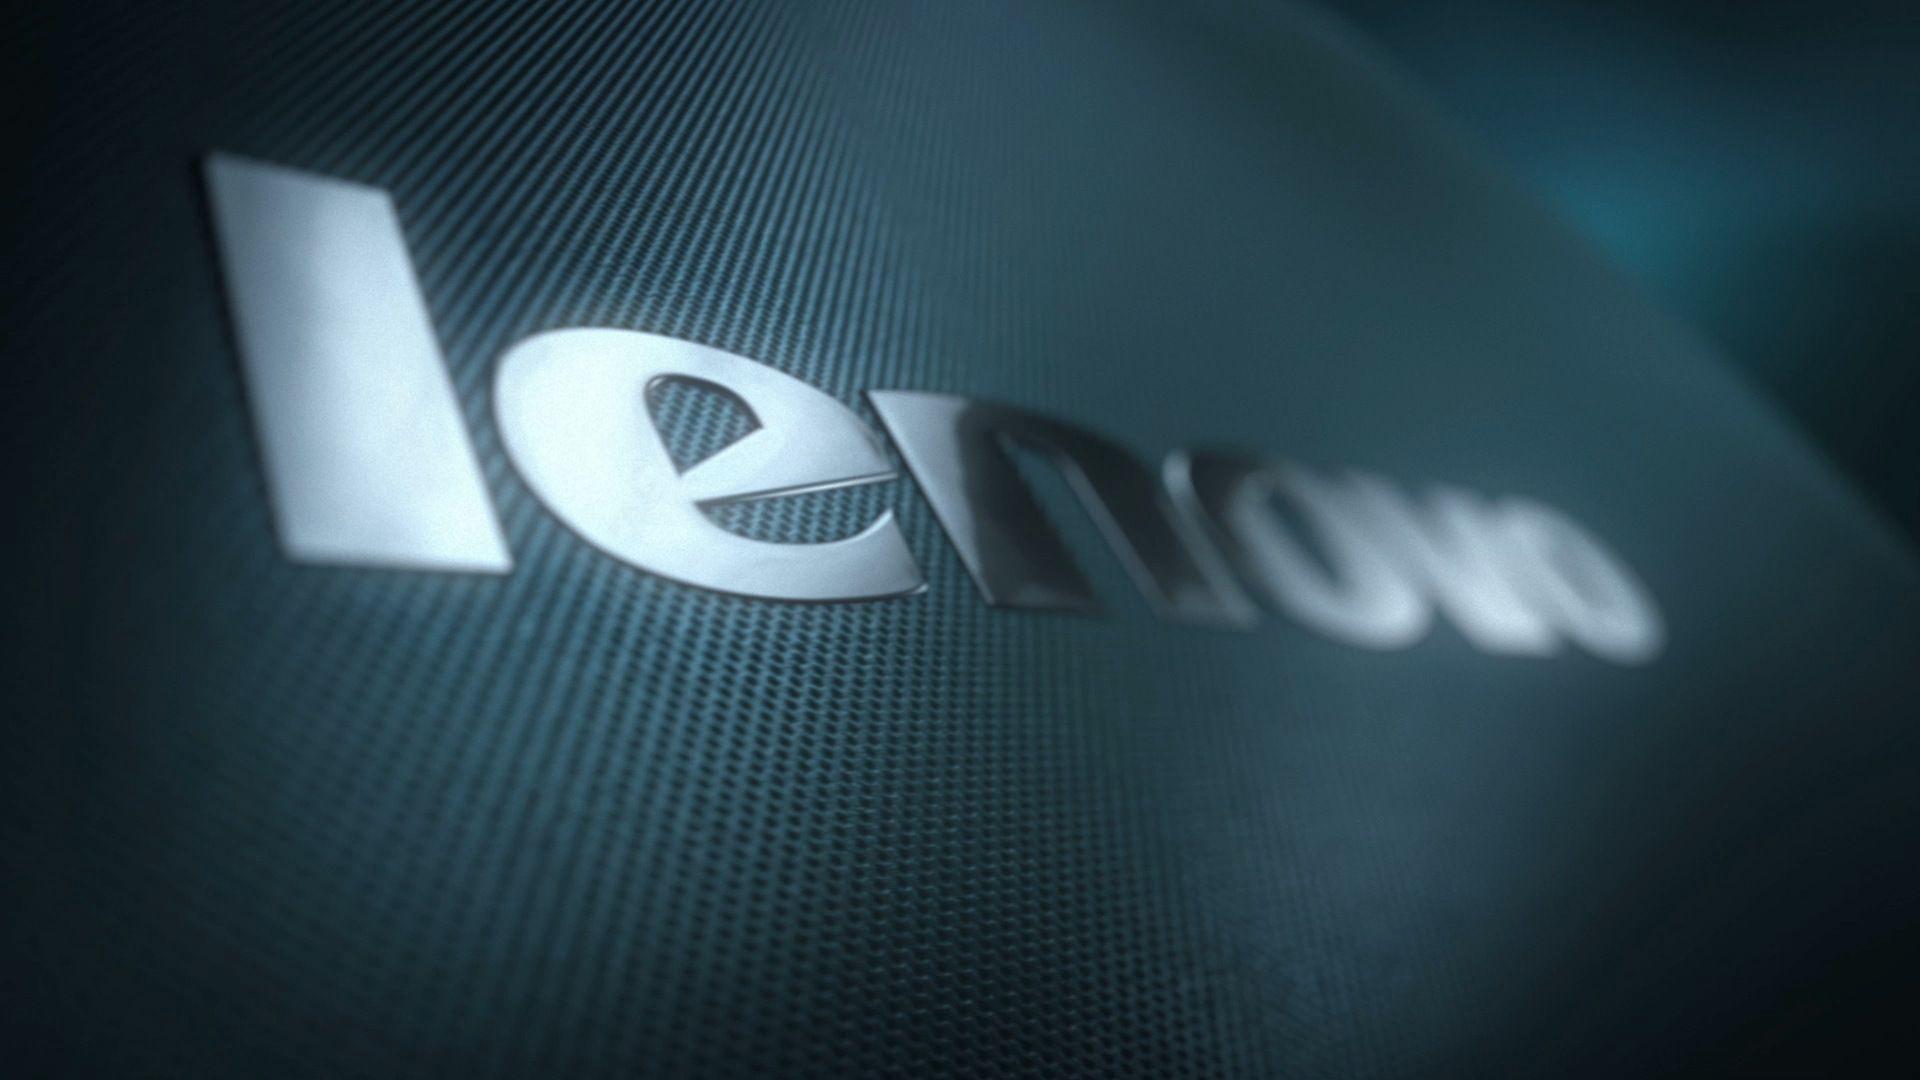 Lenovo Hd Wallpapers For Laptop